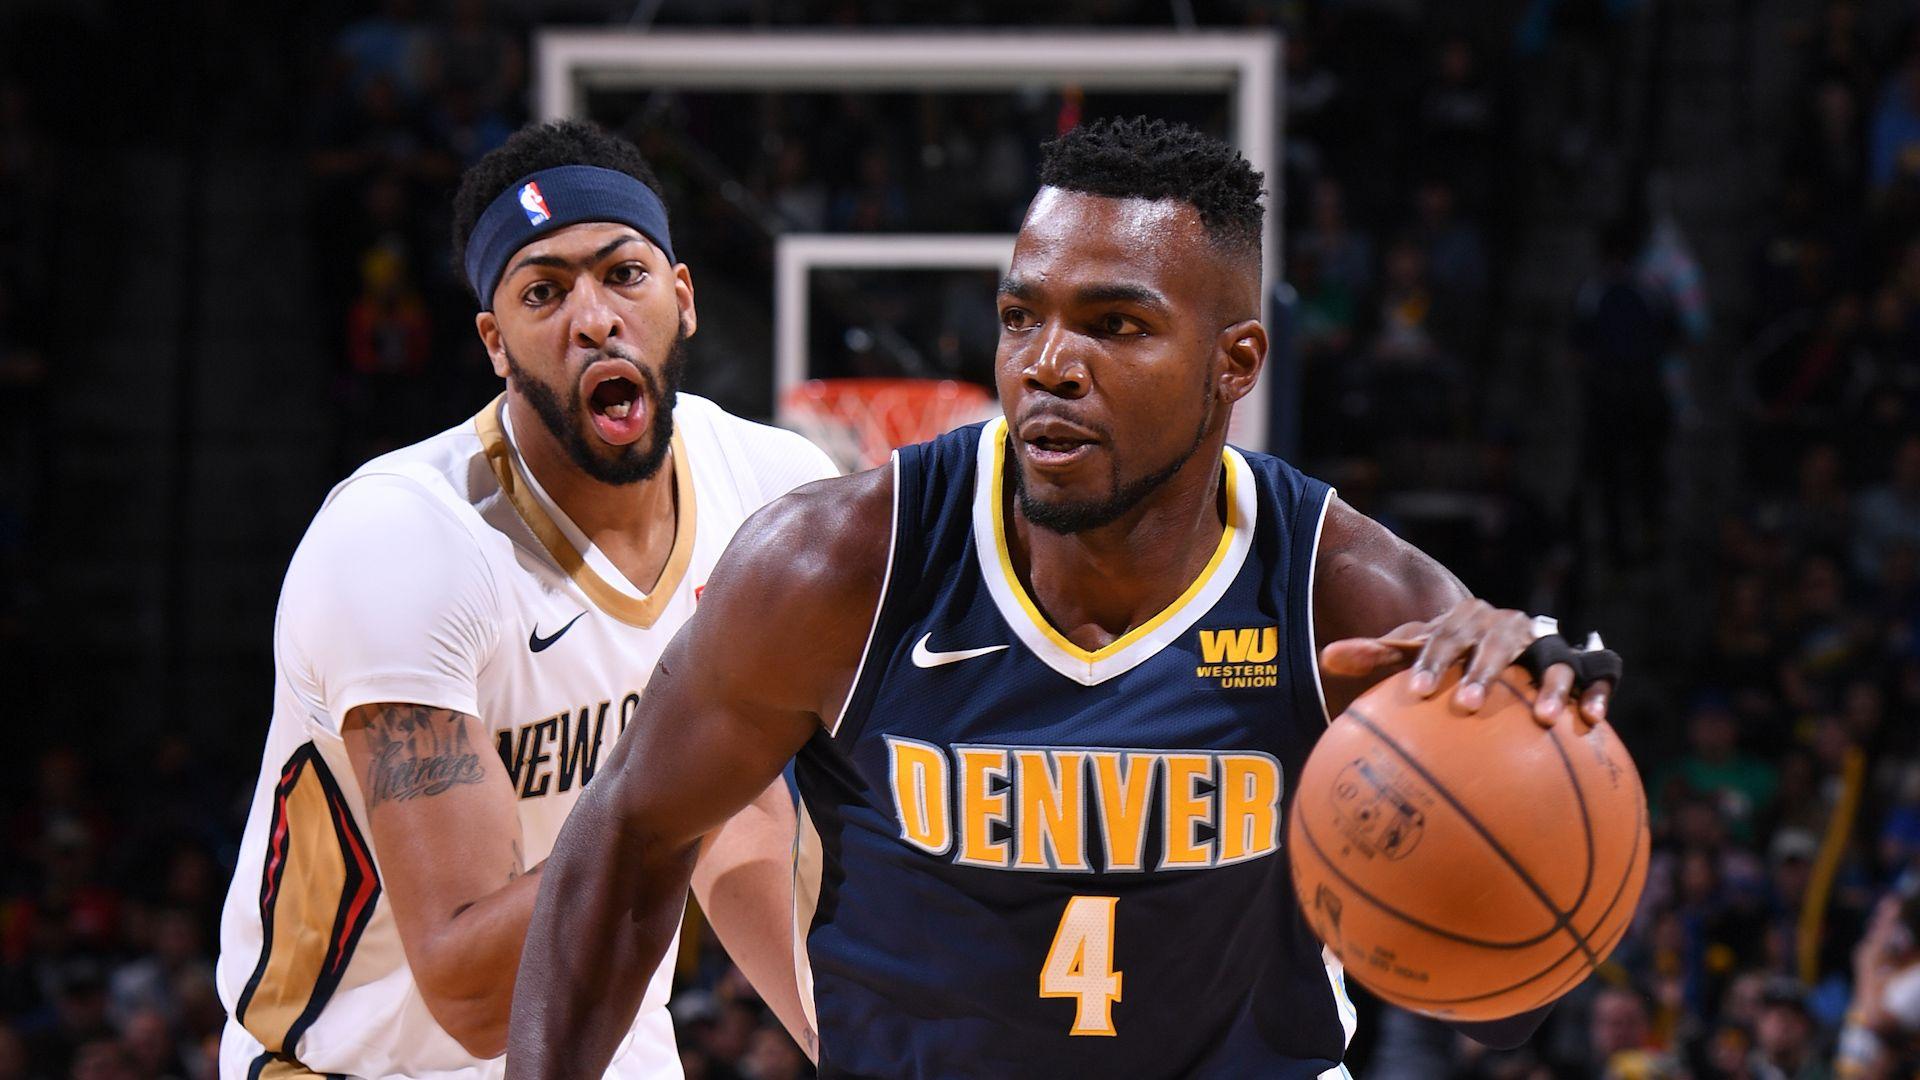 The Starters: Nuggets a Playoff Lock With Paul Millsap?